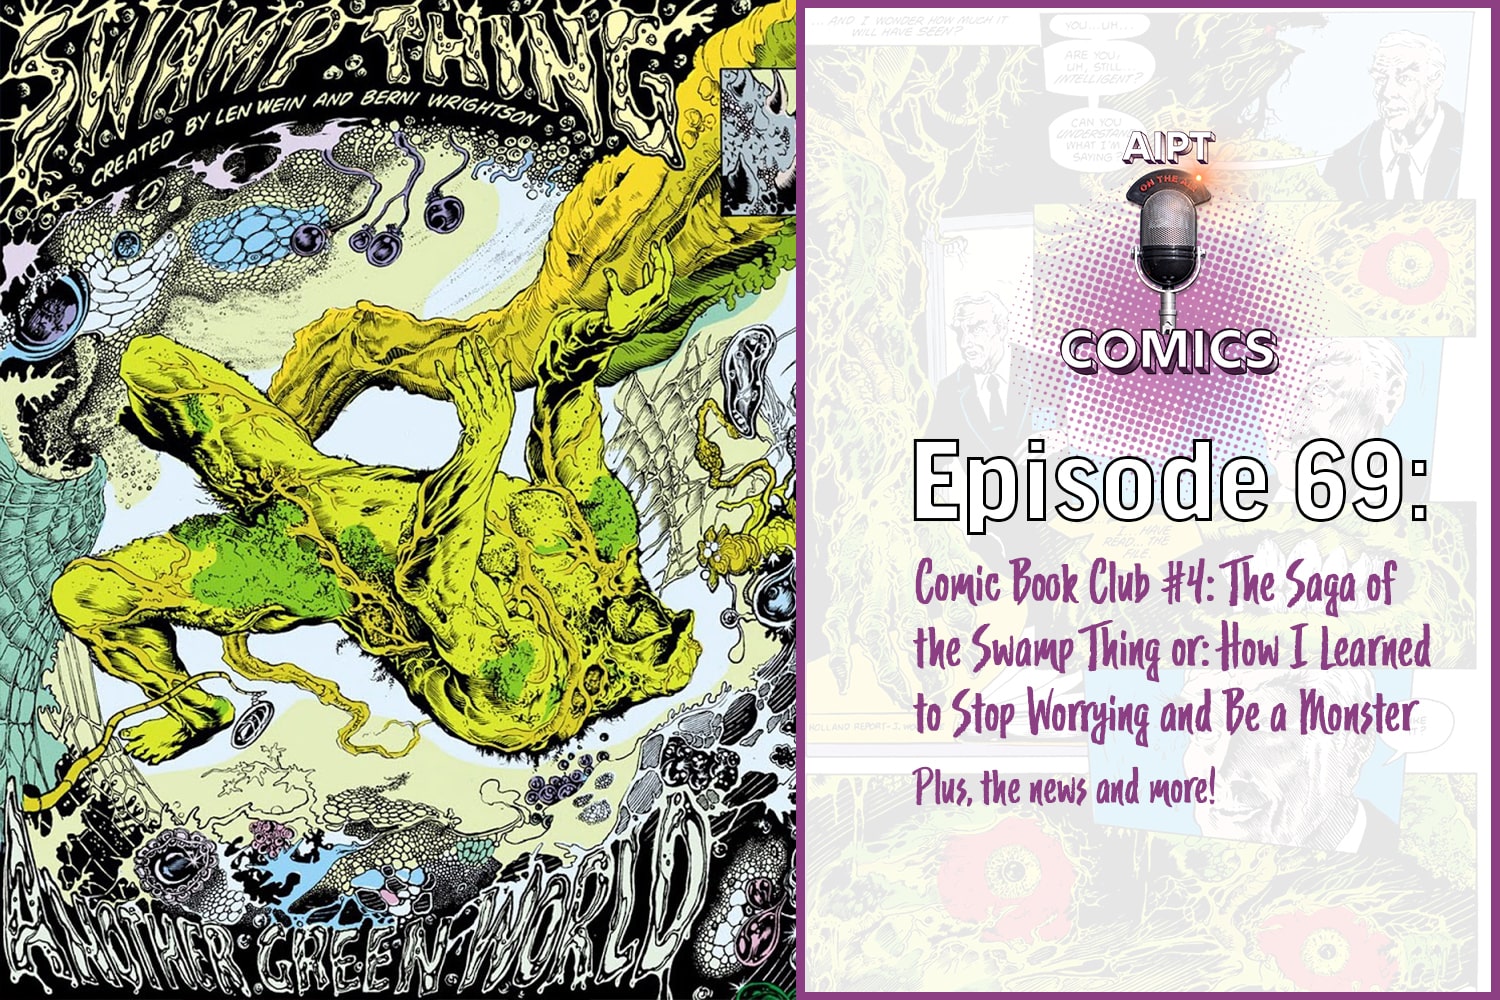 AIPT Comics Podcast episode 69: Book club breakdown #4 - Alan Moore's The Saga of the Swamp Thing